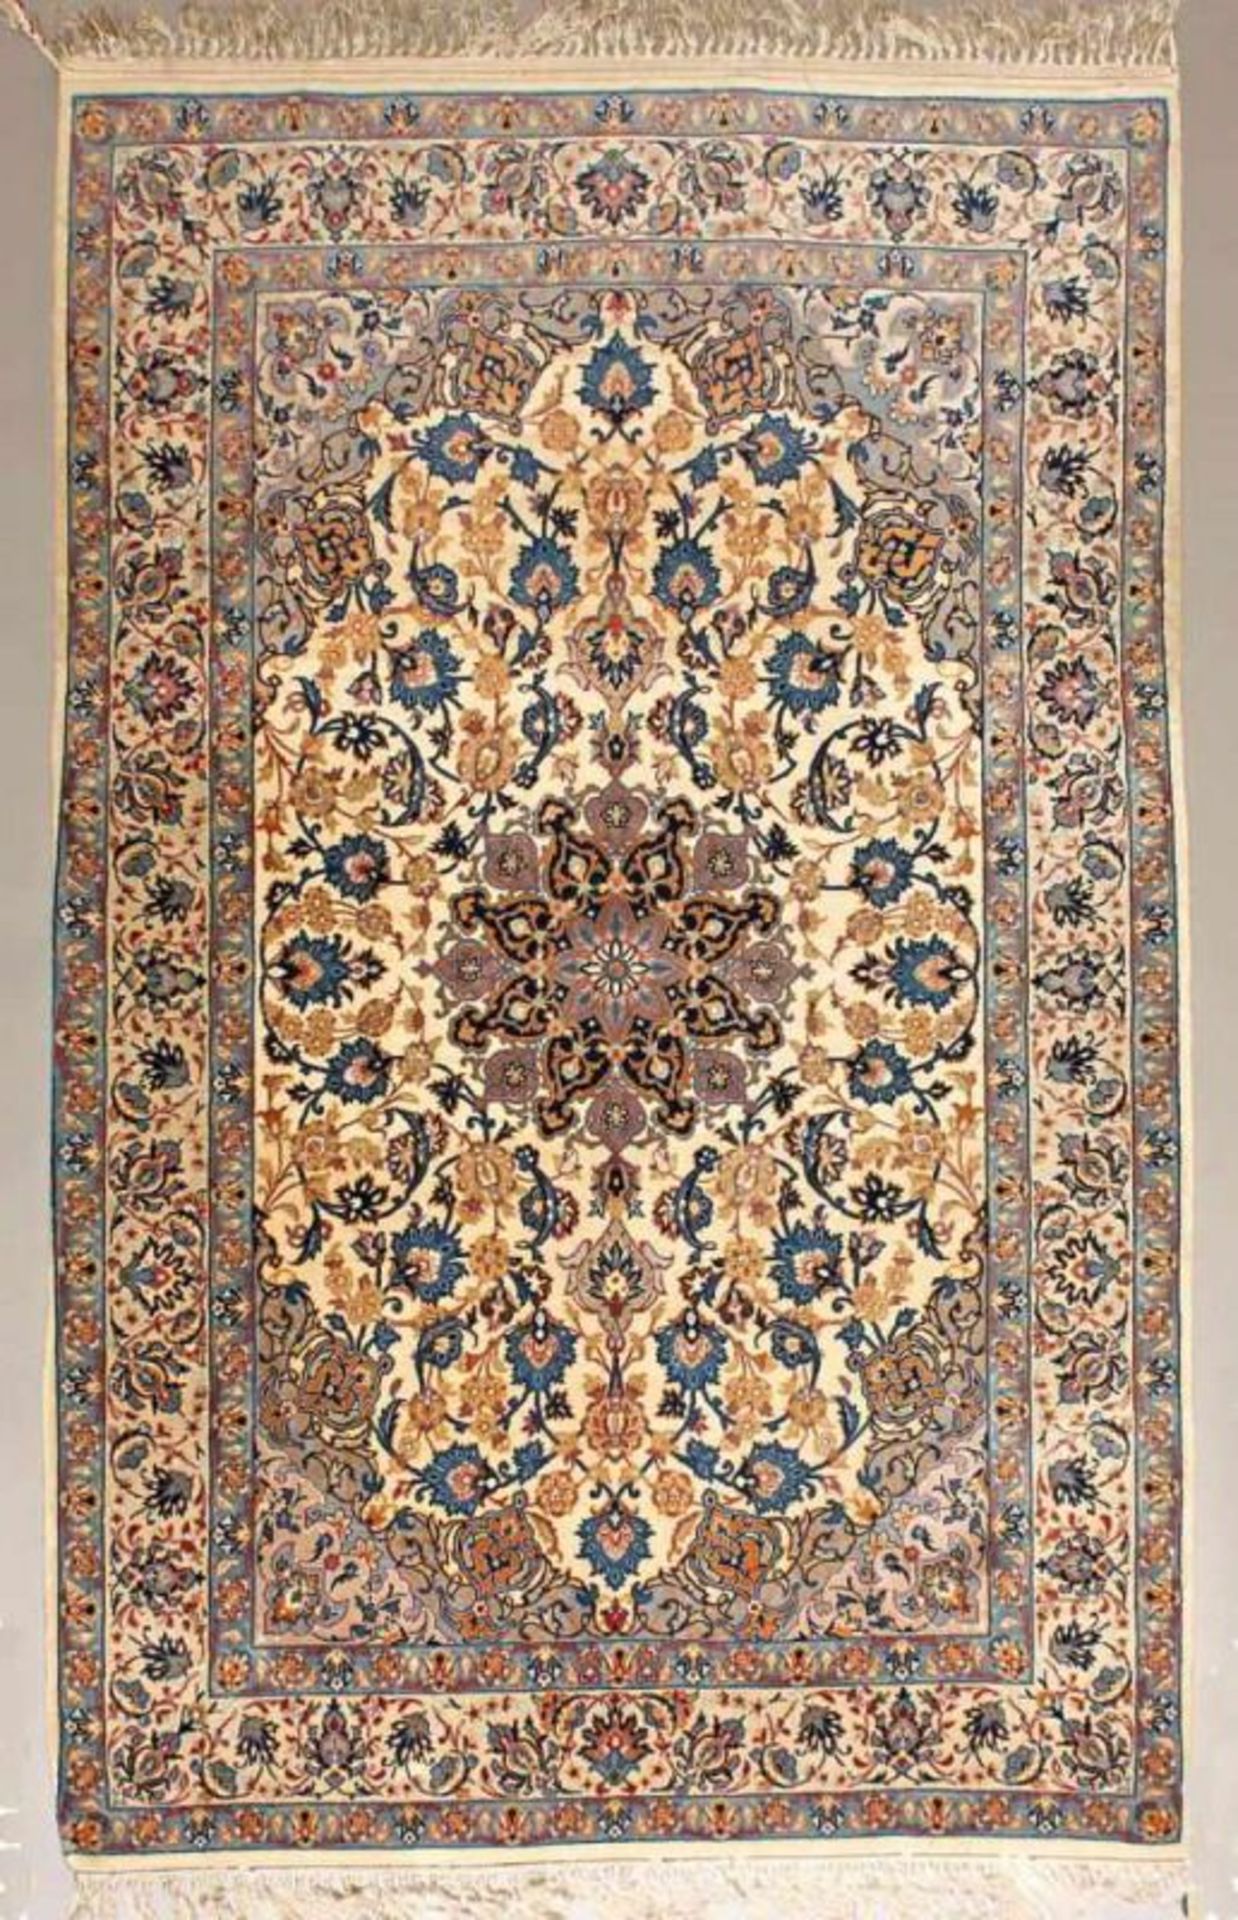 Isfahan, Persien, ca. 1.65 x 1.08 m, feine Knüpfung 21.01 % buyer's premium on the hammer price 19.